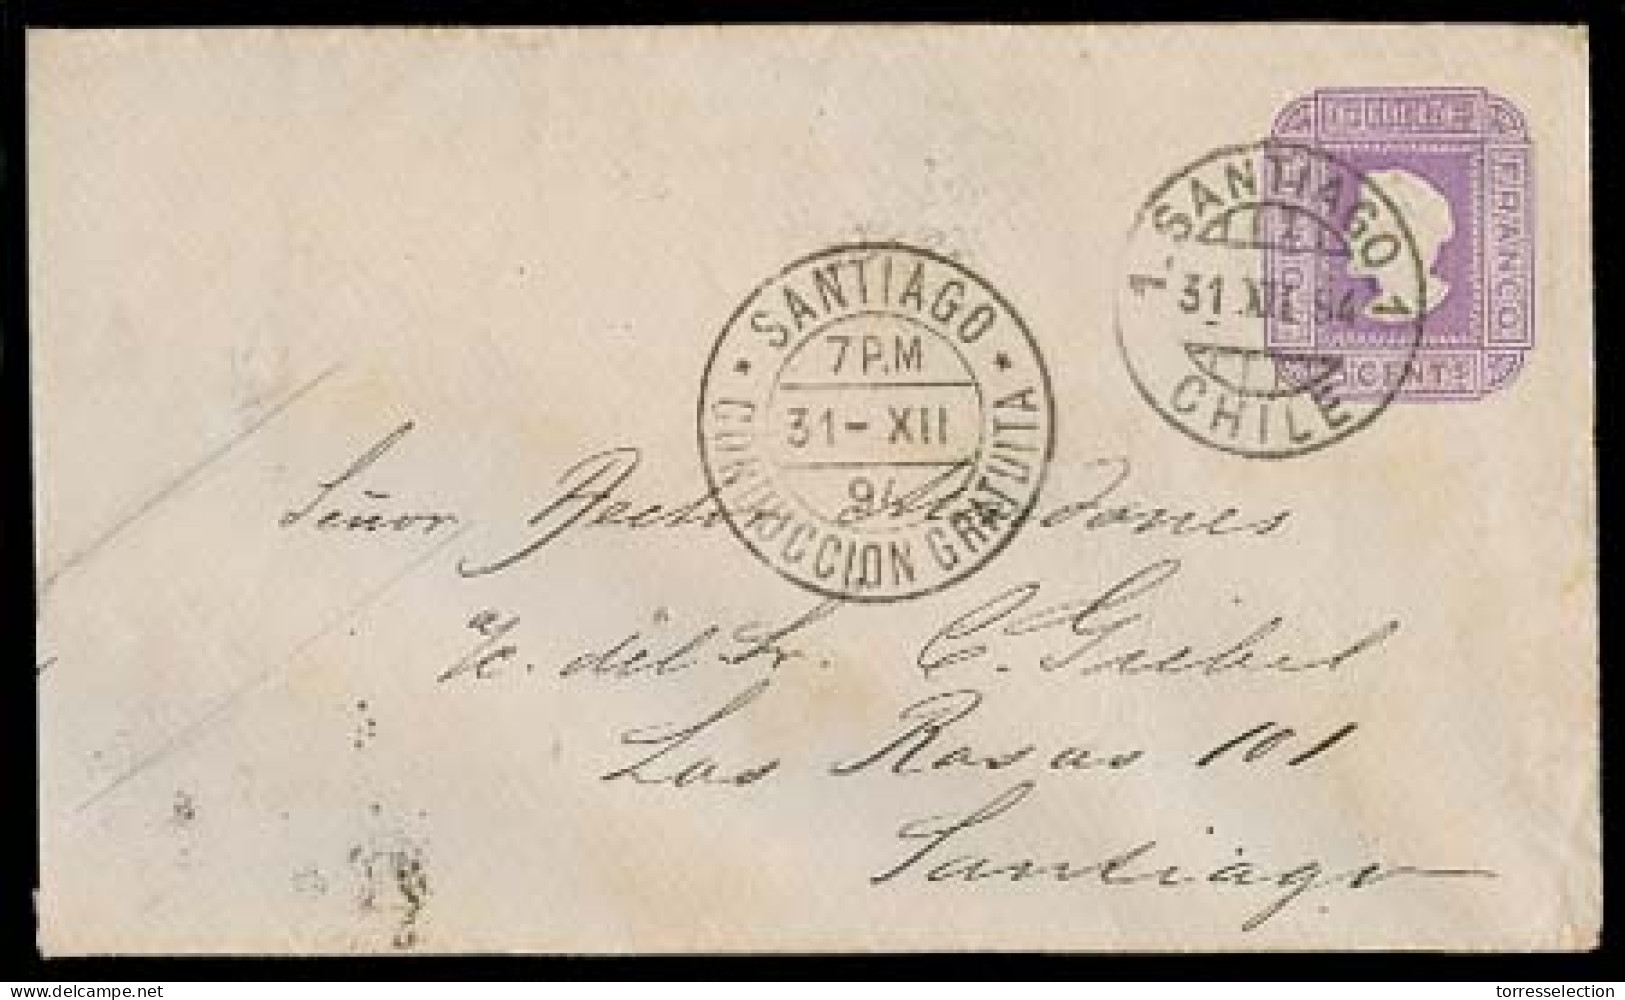 CHILE - Stationery. 1894. Santiago Local Usage 5c Stat Env. ABN 1889. Wmk Laid Frame Lines 18,5 Mm. 140 X 81 Mm. VF. - Chile